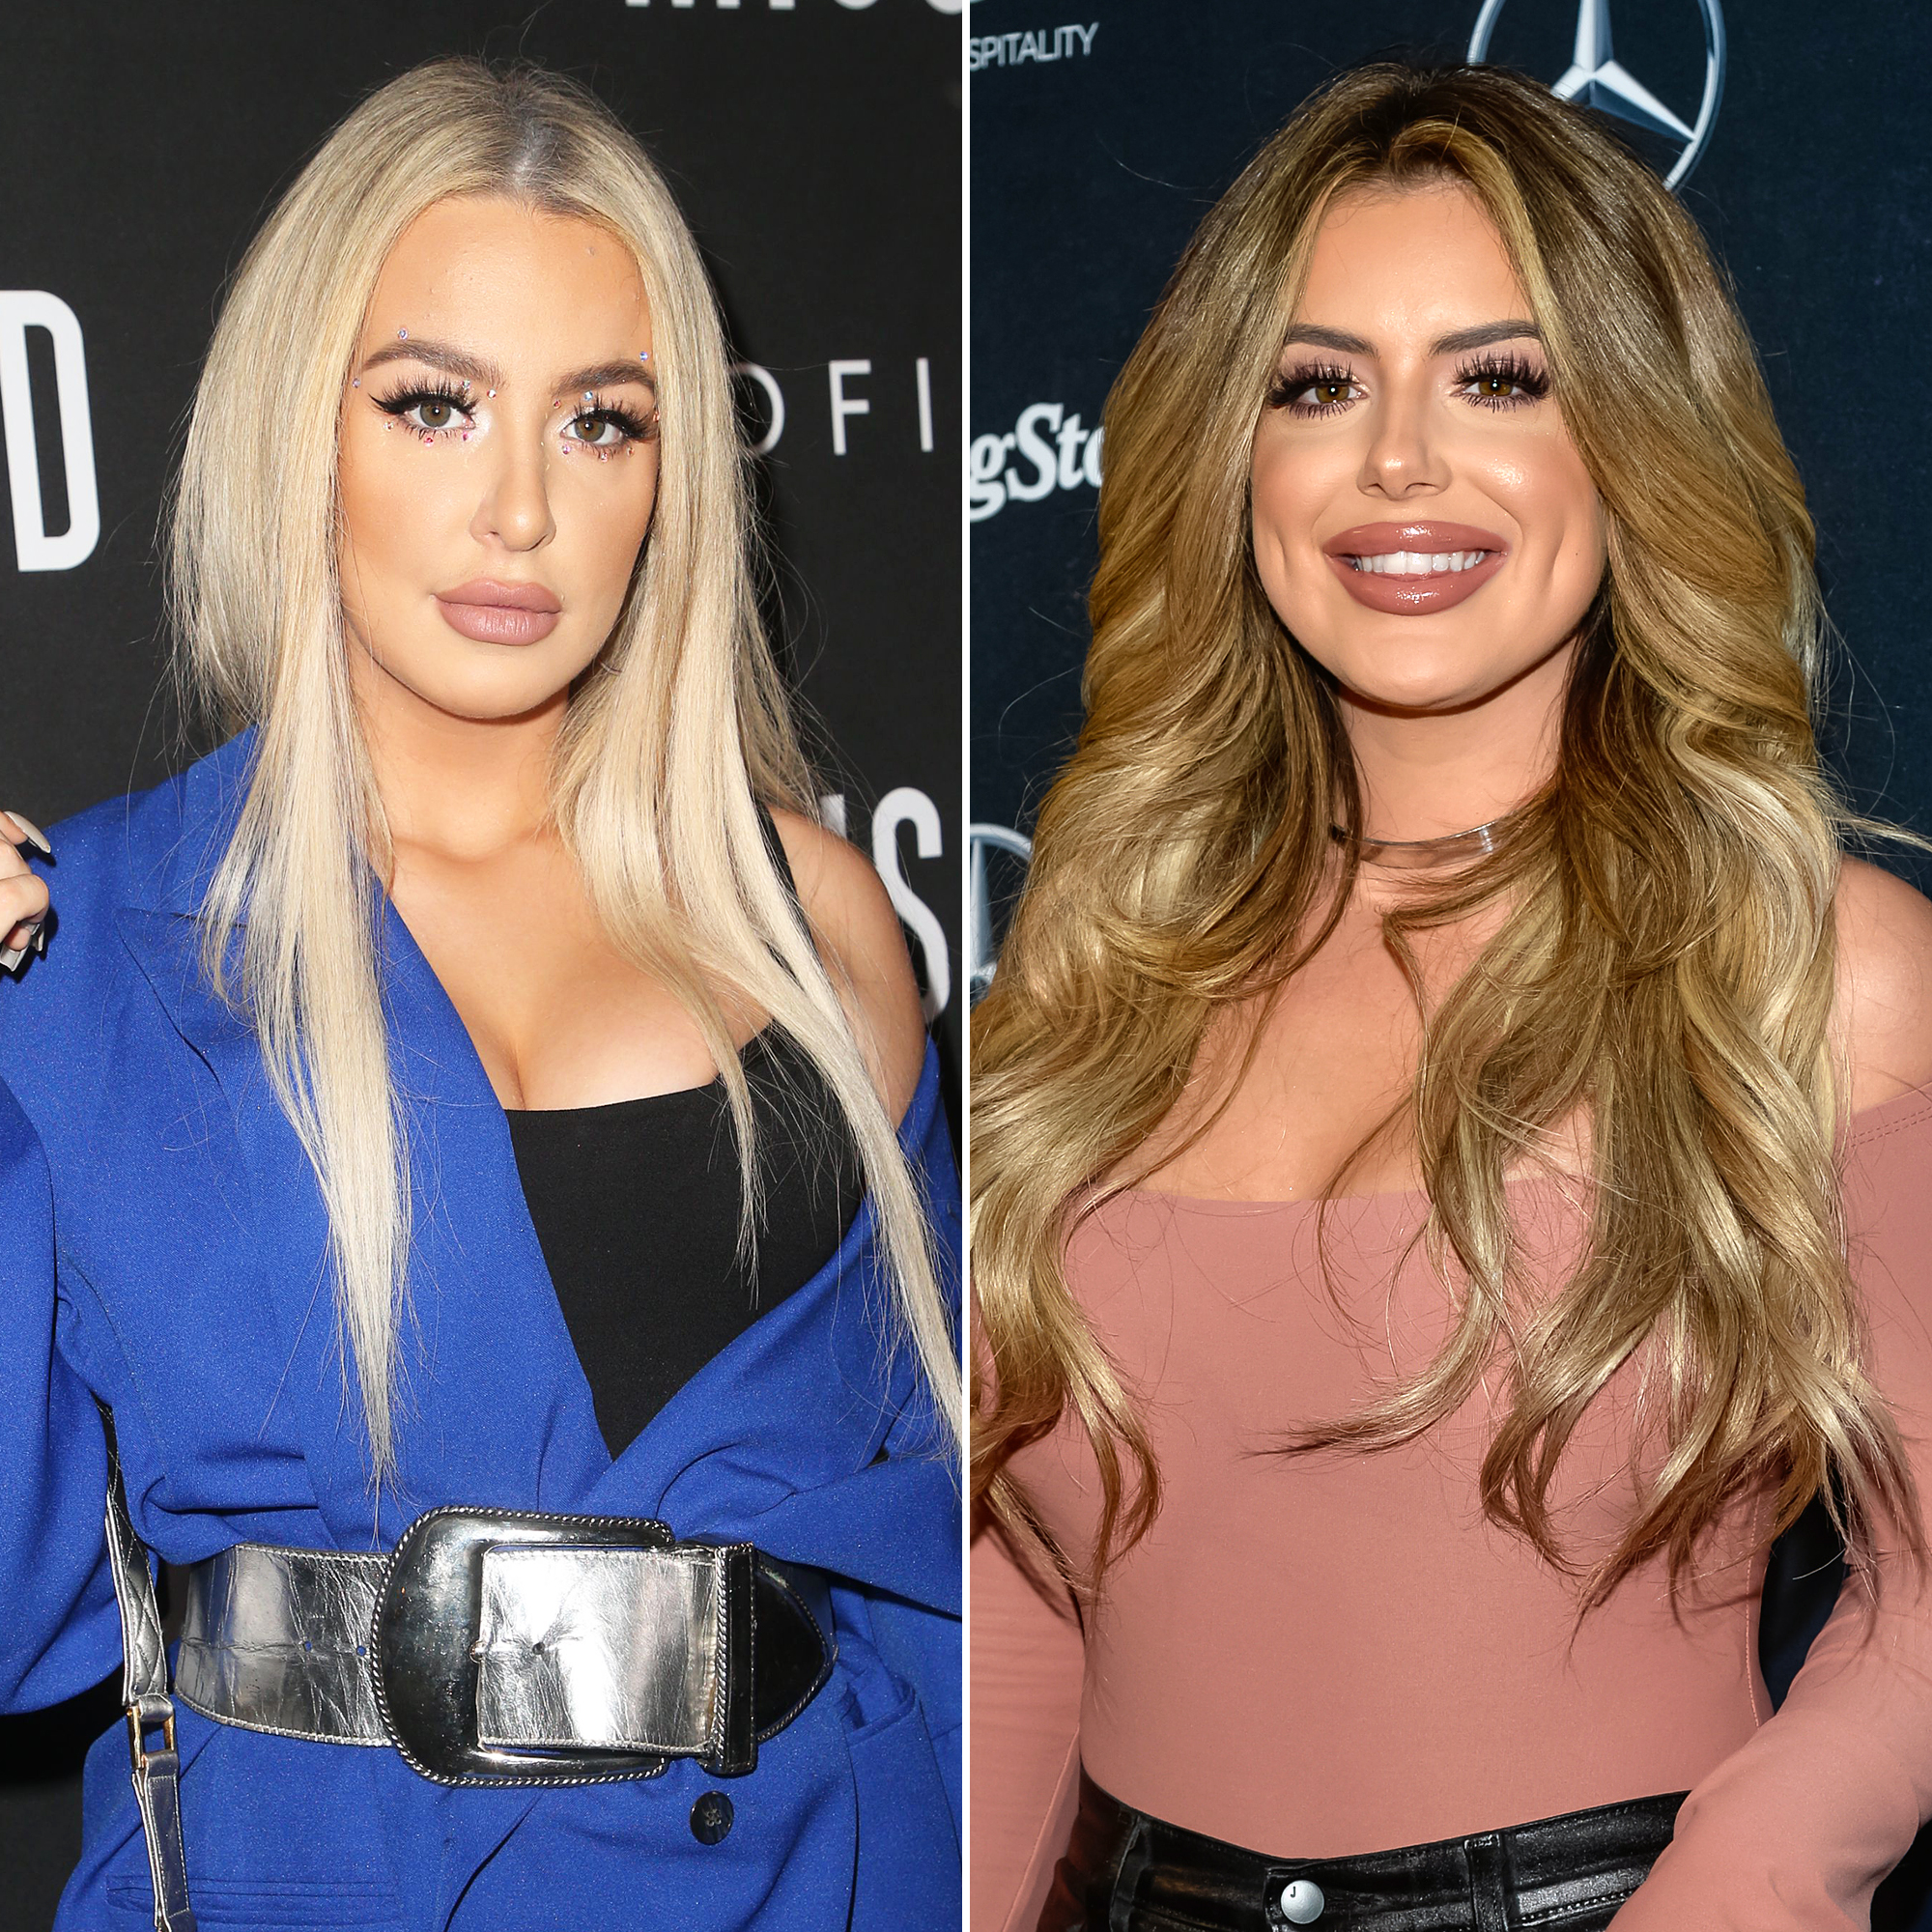 Brielle Biermann Is 'Single' After Romance With Justin Hooper